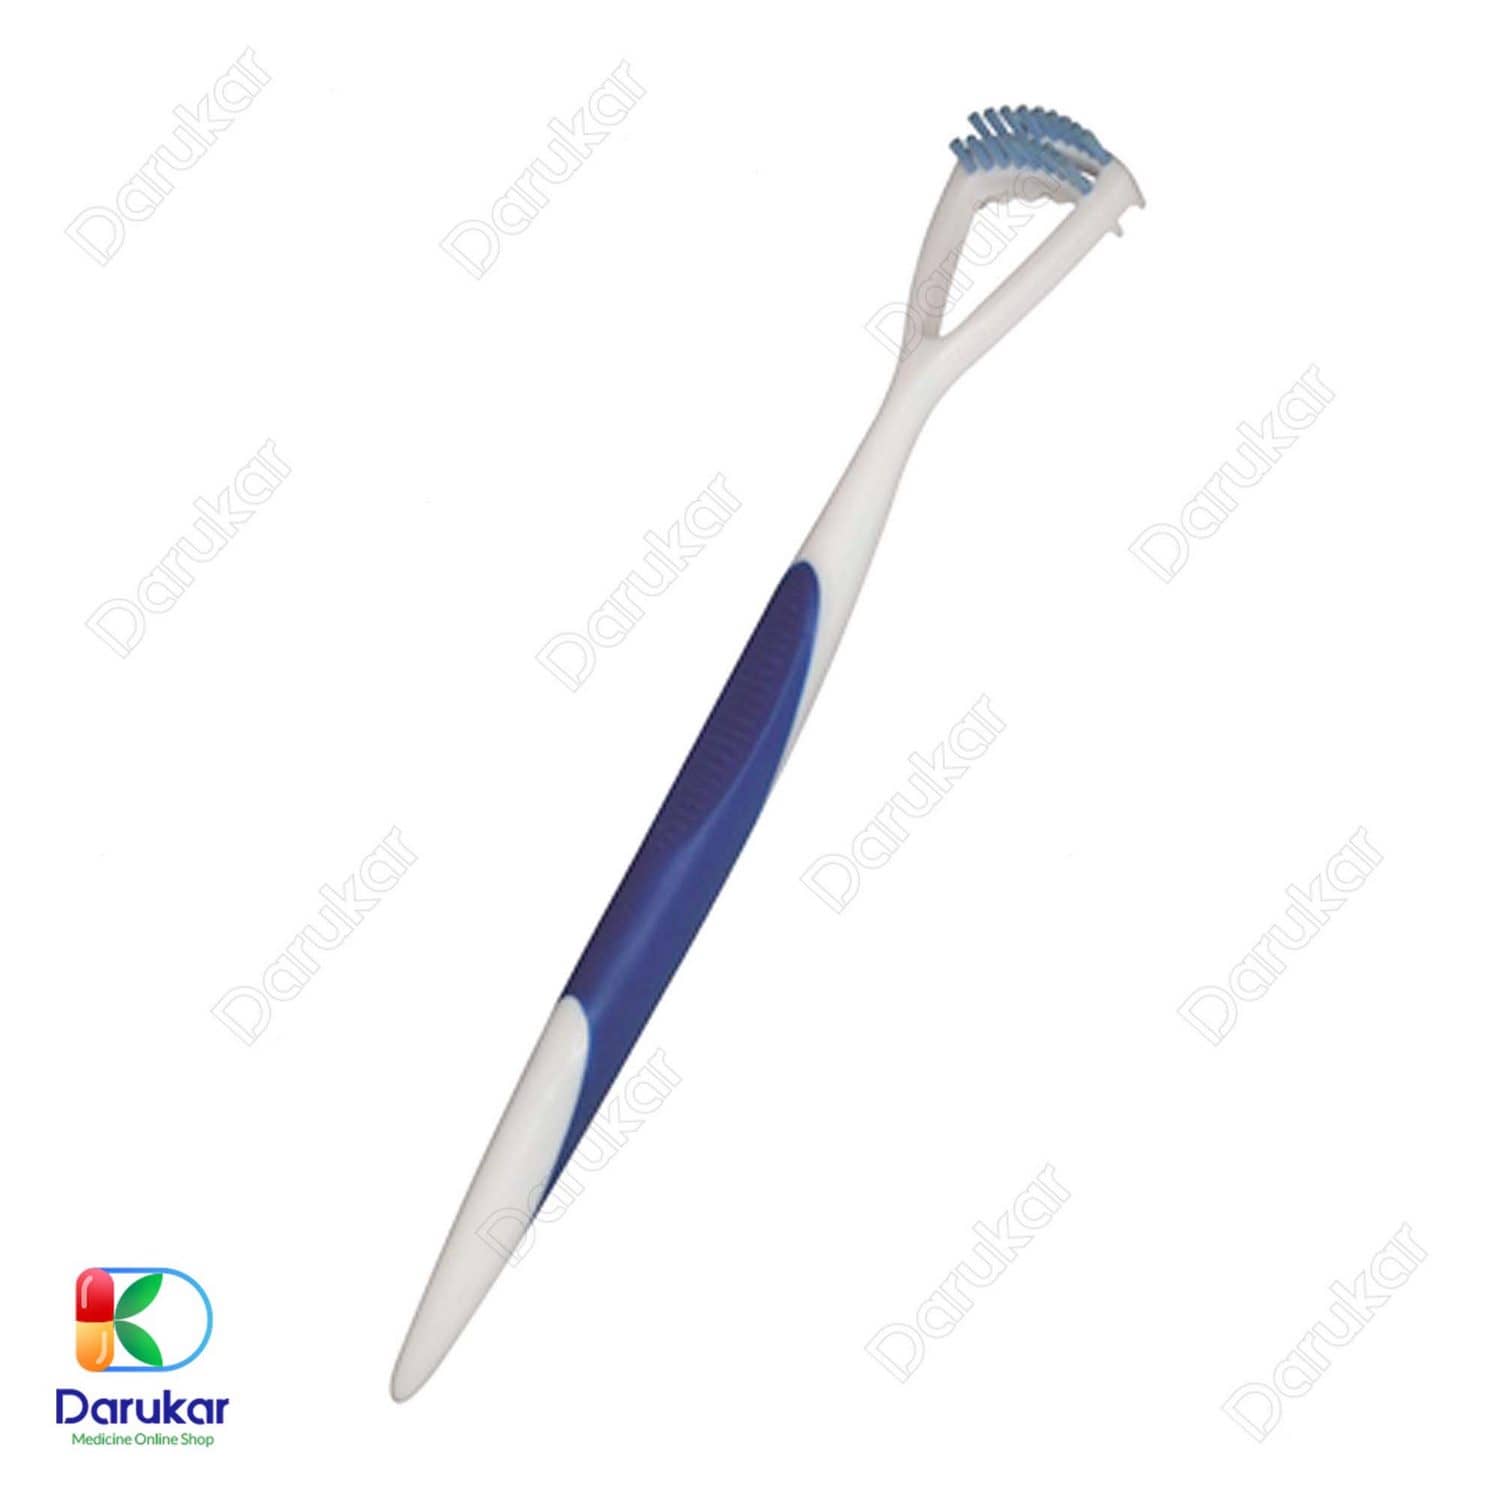 G.U.M Tongue Cleaner Tooth Brush 760 Image Gallery